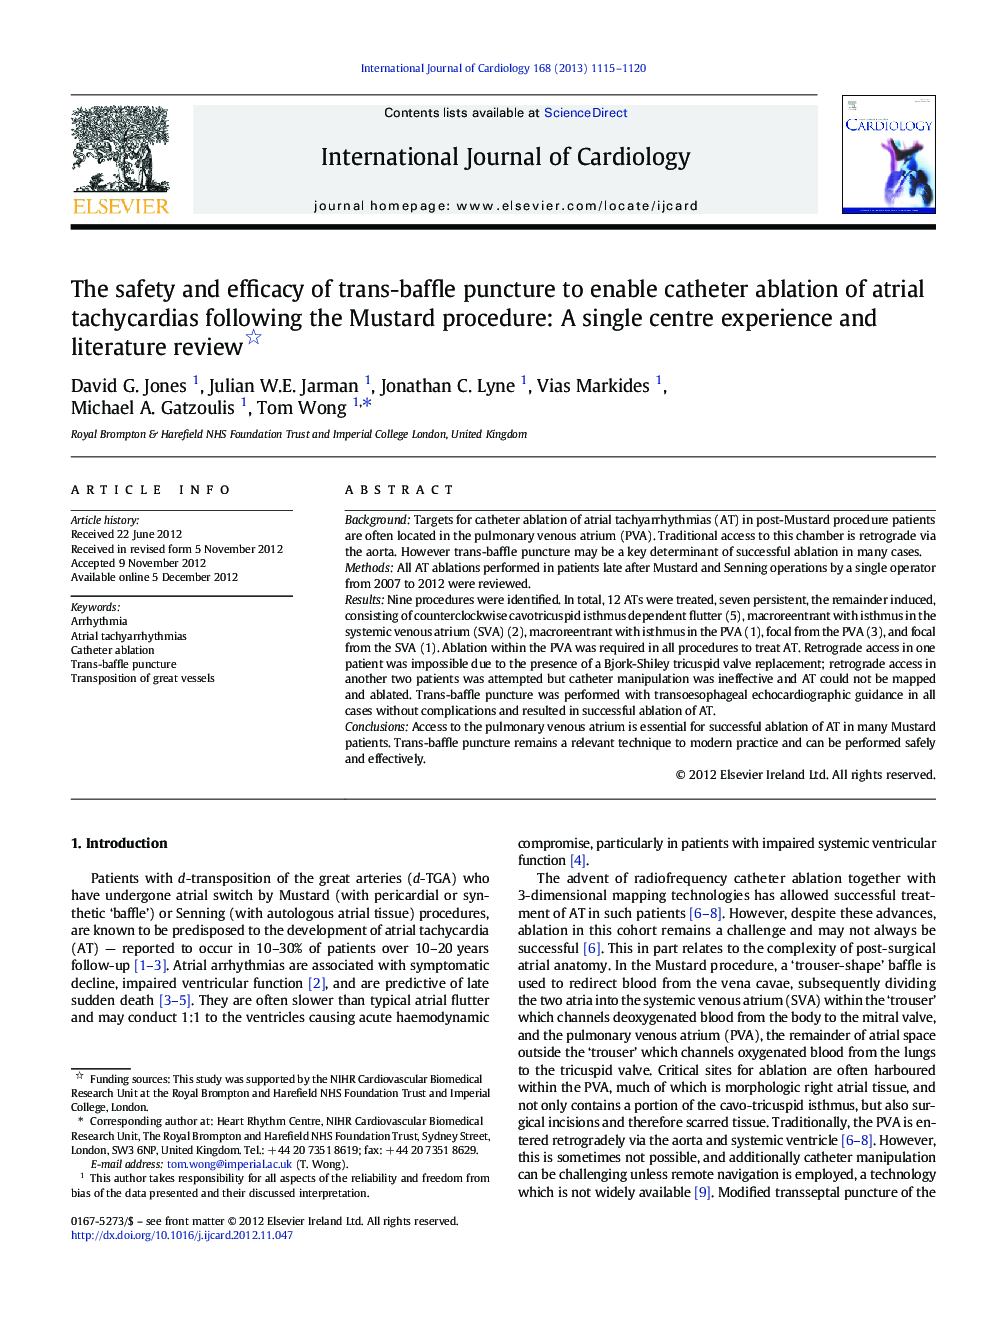 The safety and efficacy of trans-baffle puncture to enable catheter ablation of atrial tachycardias following the Mustard procedure: A single centre experience and literature review